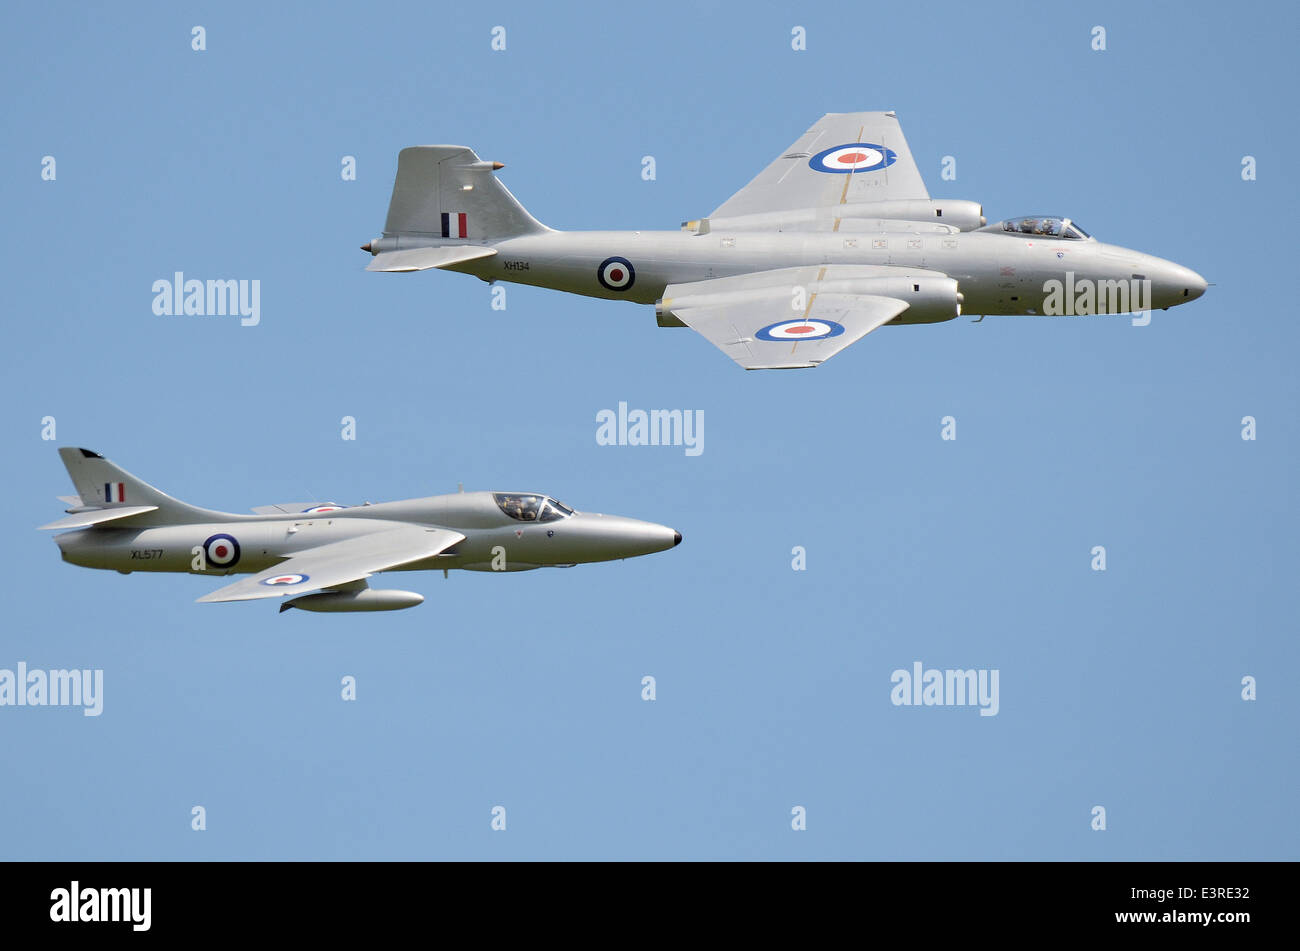 Canberra and Hunter vintage jets flying in blue sky. Hawker Hunter and English Electric Canberra vintage planes of Midair Squadron Stock Photo